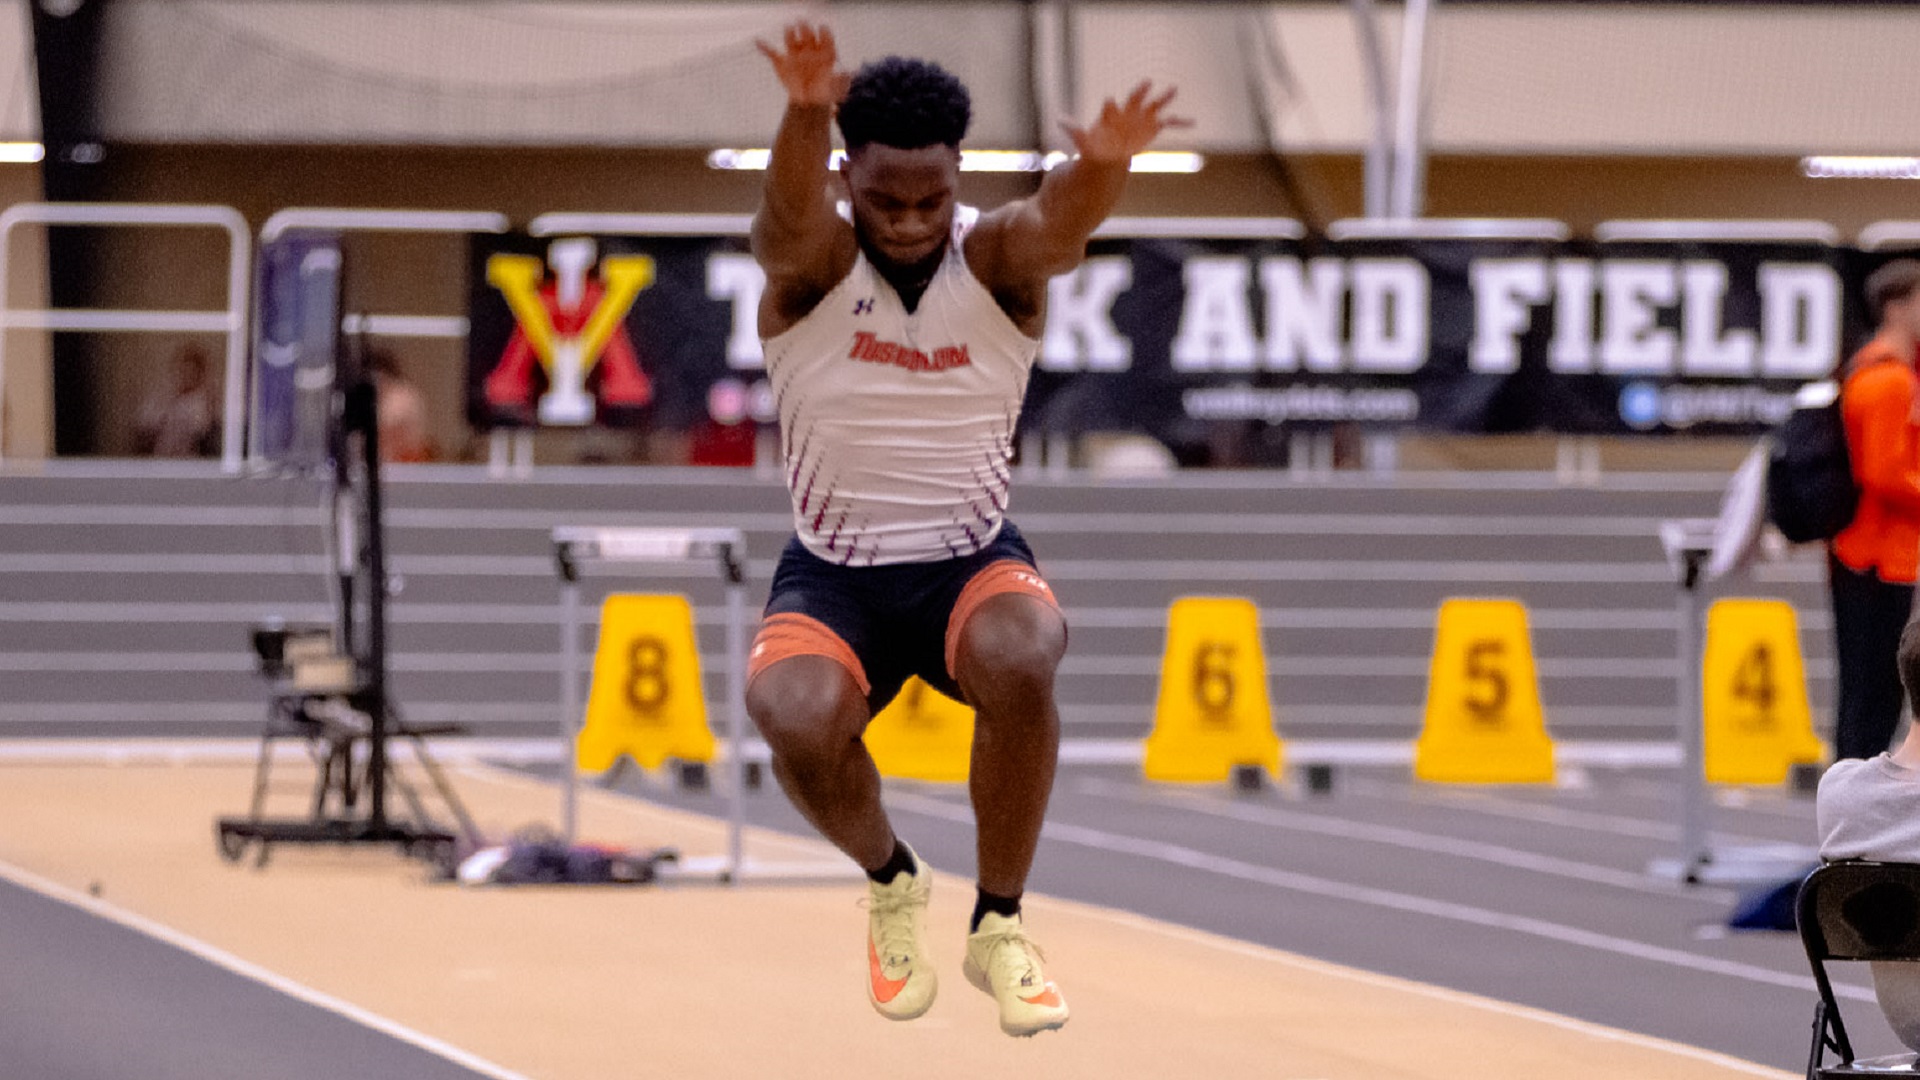 Smith competes in triple jump at NCAA Indoor Championship